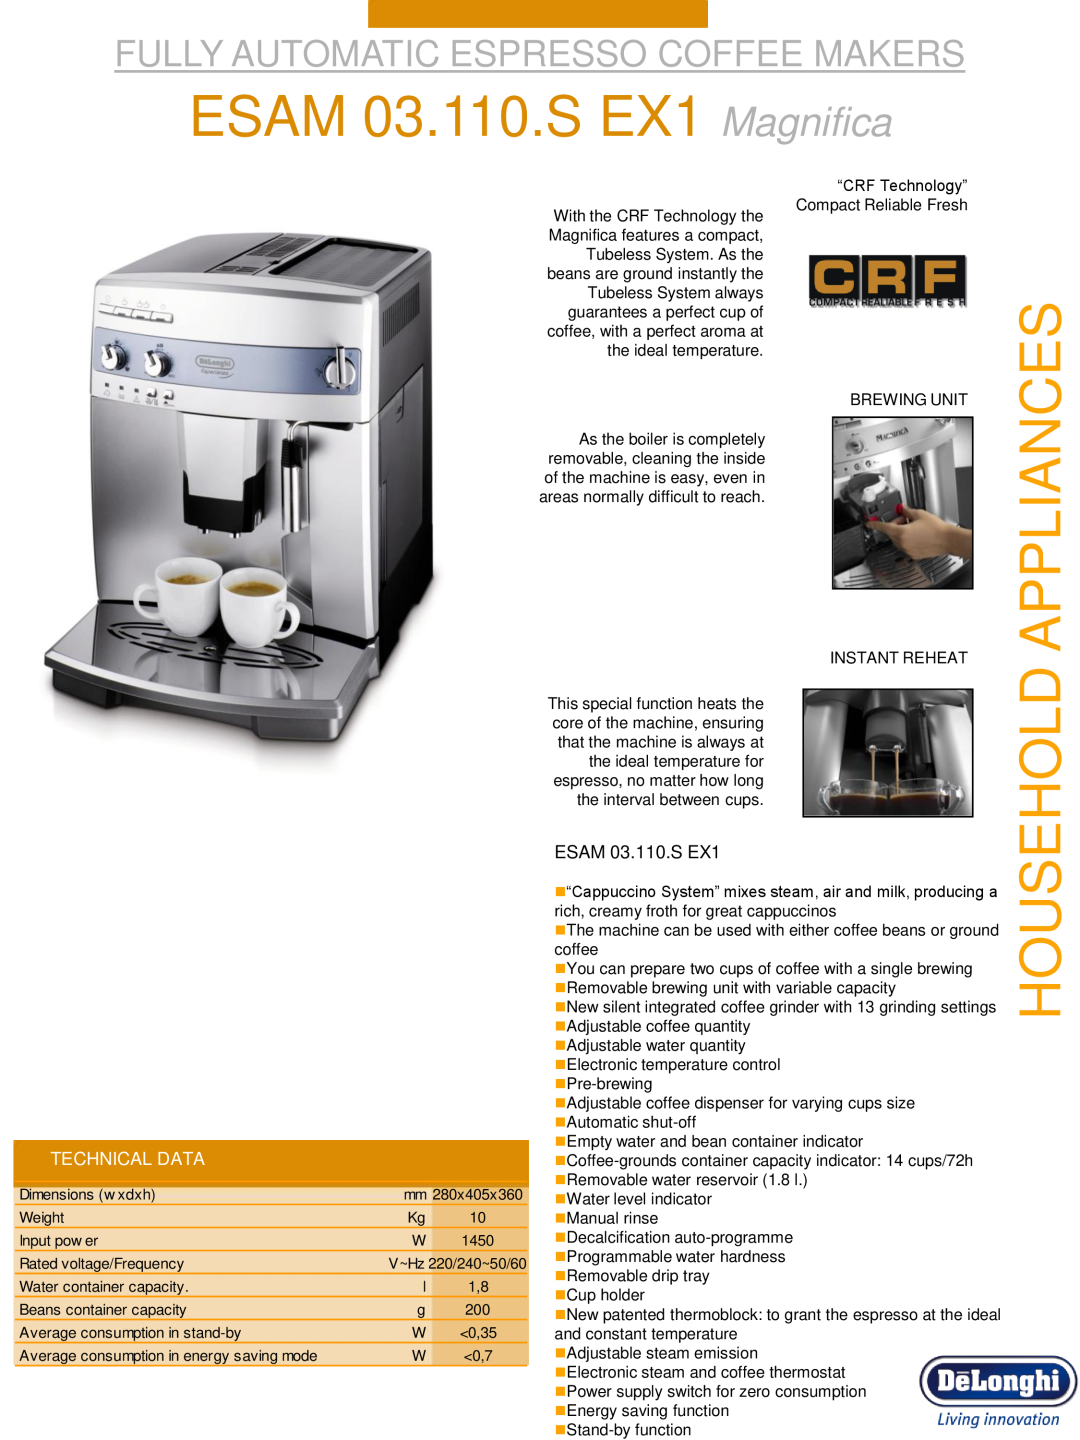 DeLonghi dimensions ESAM 03.110.S EX1 Magnifica, Household Appliances, Fully Automatic Espresso Coffee Makers 